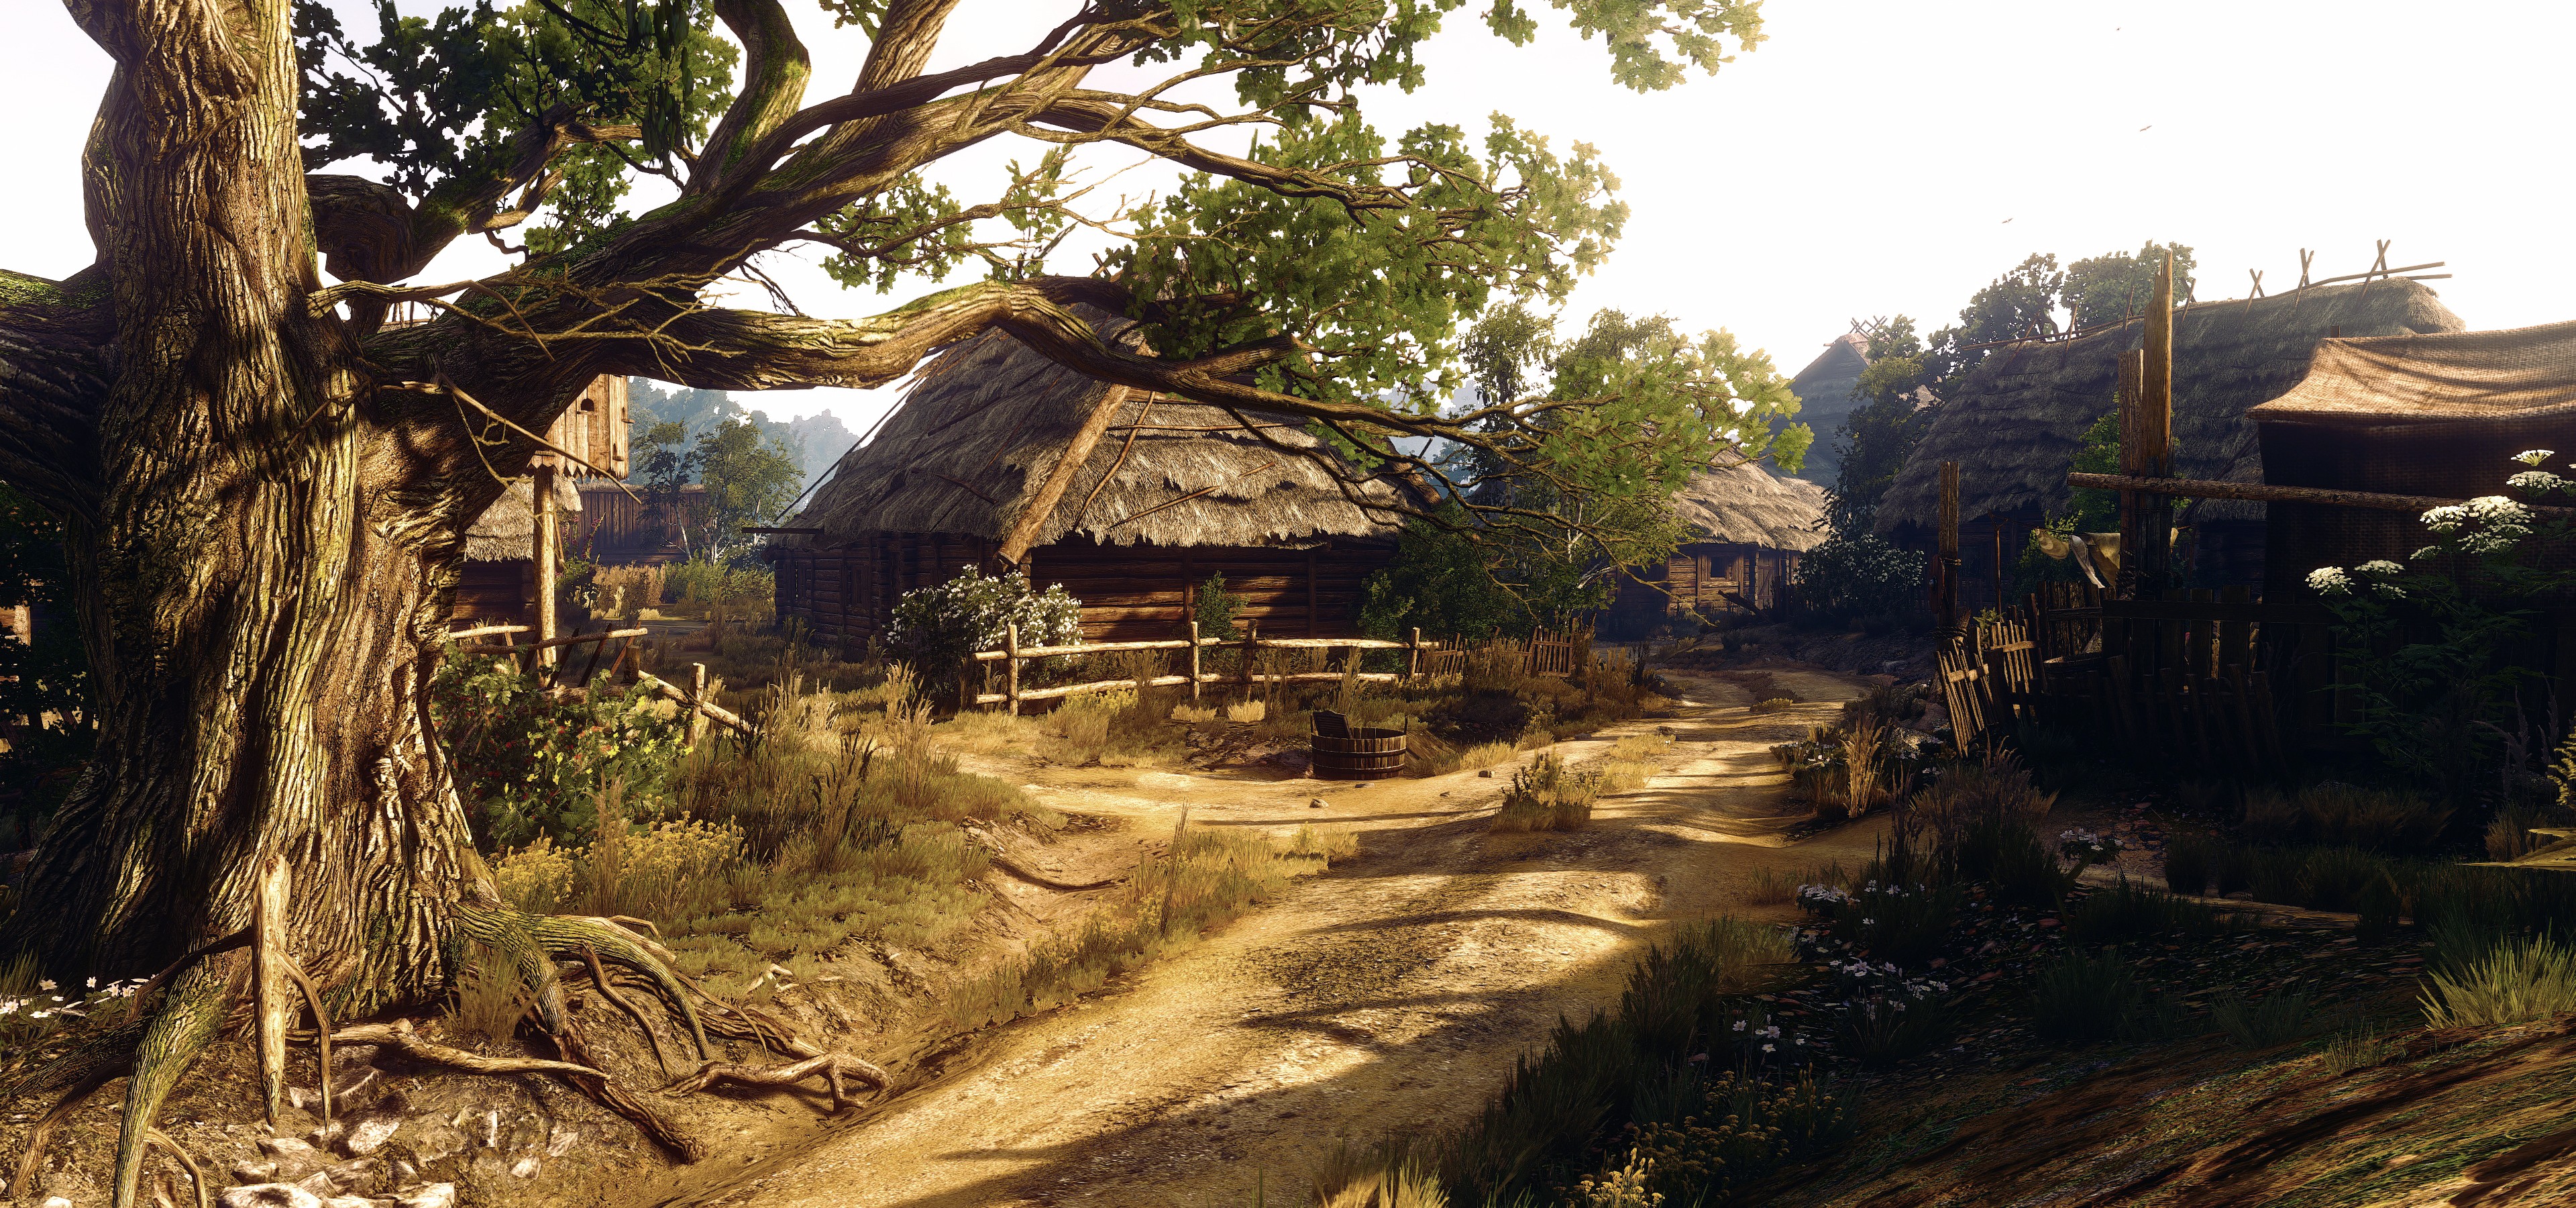 General 3840x1800 video games The Witcher 3: Wild Hunt screen shot RPG PC gaming village